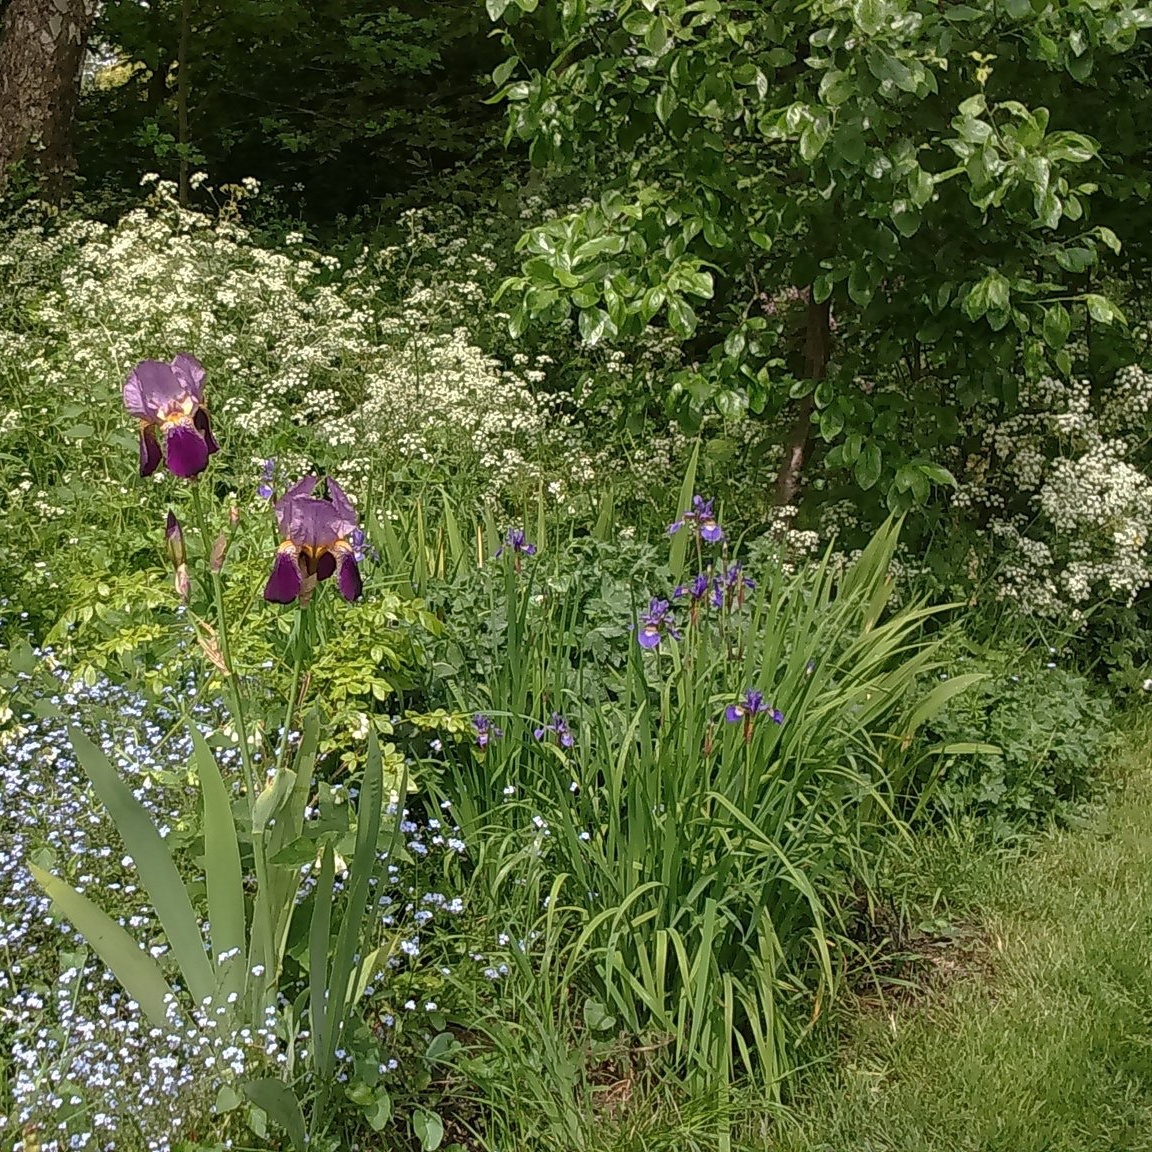 Irises, forget-me-nots and cow parsley in the community garden